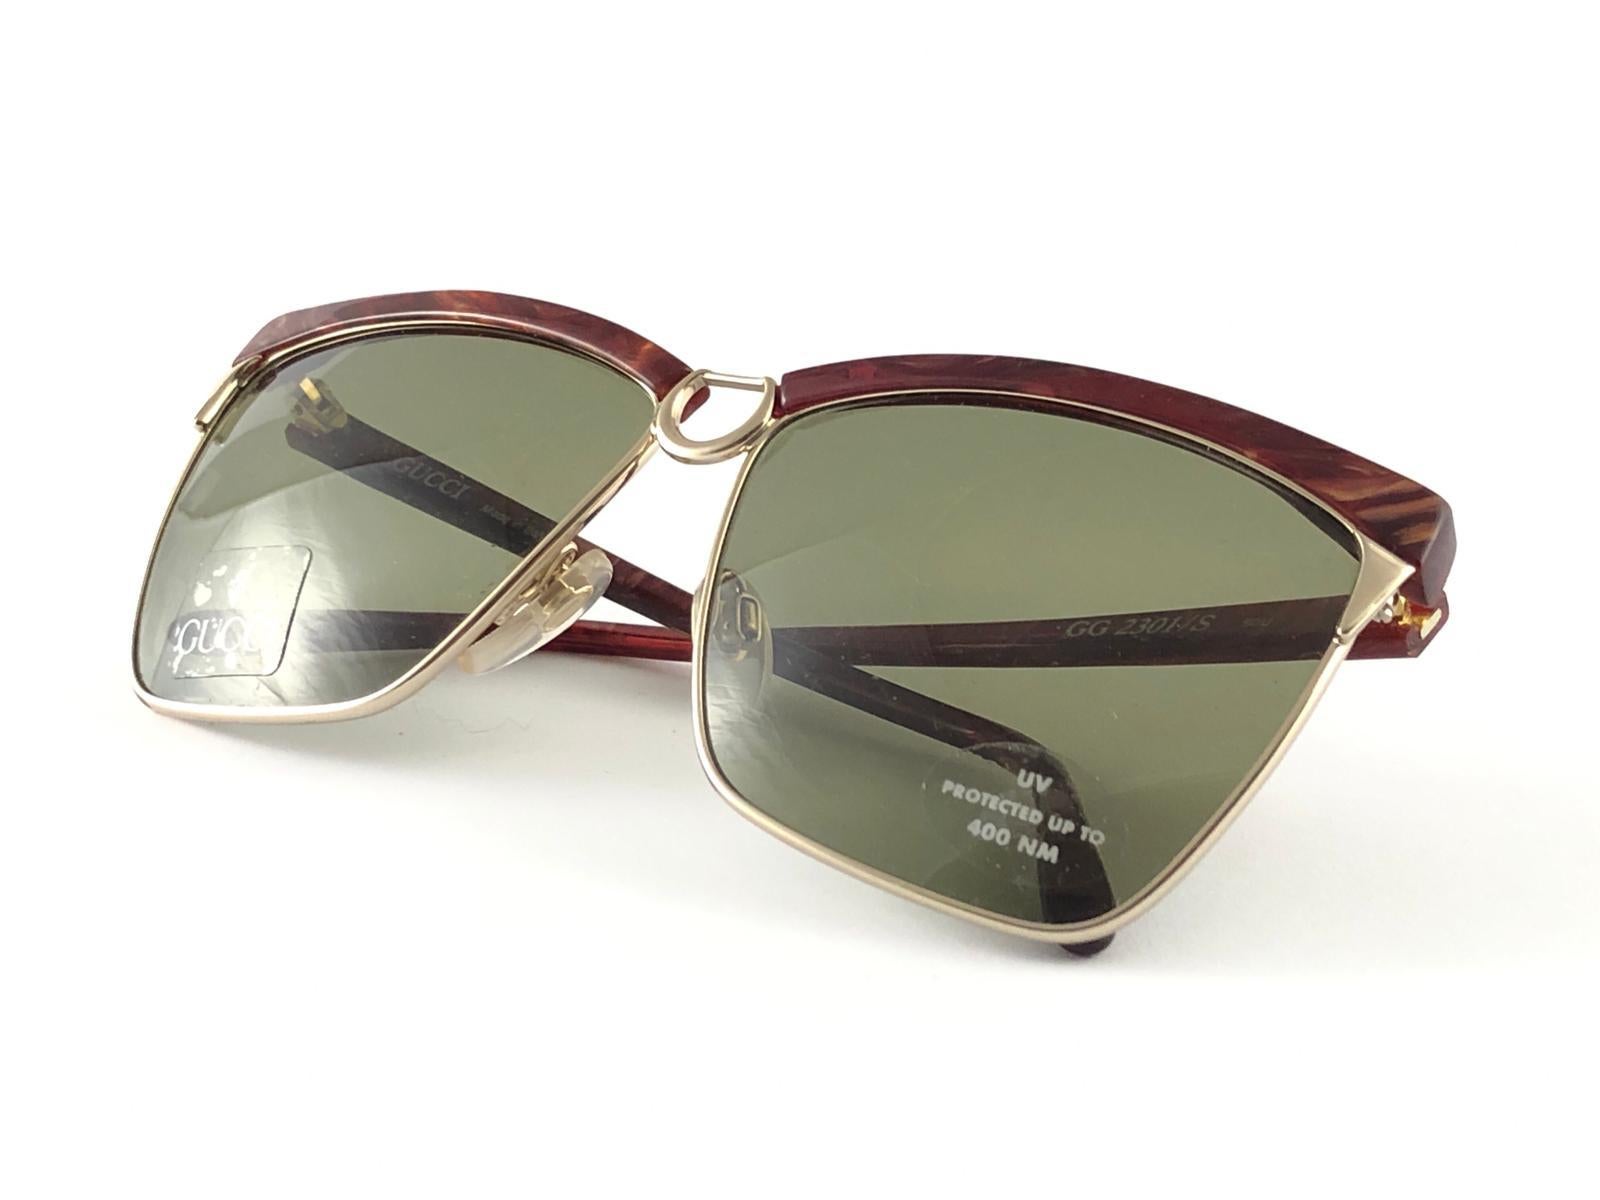 New Vintage Gucci Gold & Marbled 2301/S Accents Sunglasses 1980's Made in Italy For Sale 1